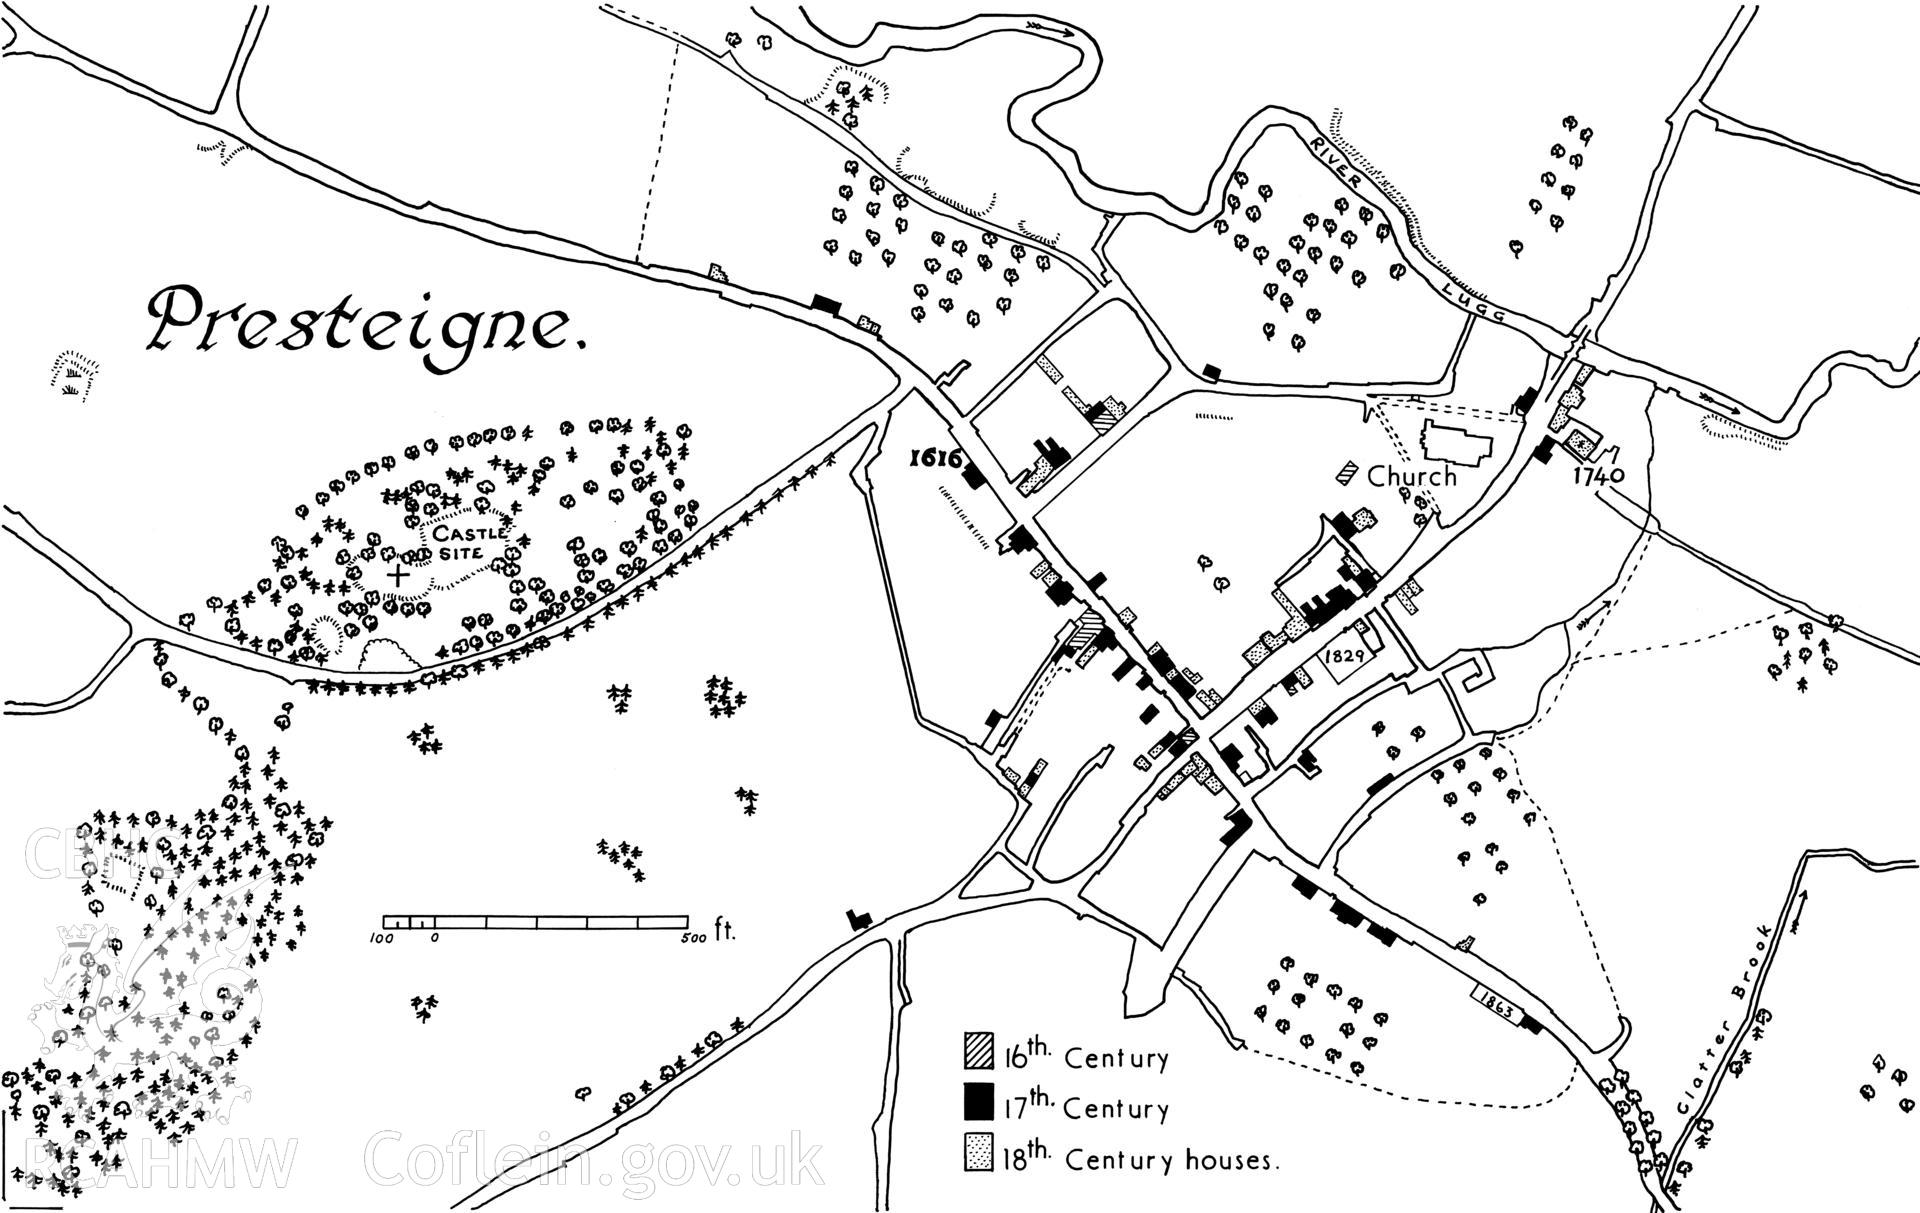 RCAHMW drawing showing plan of Presteigne.